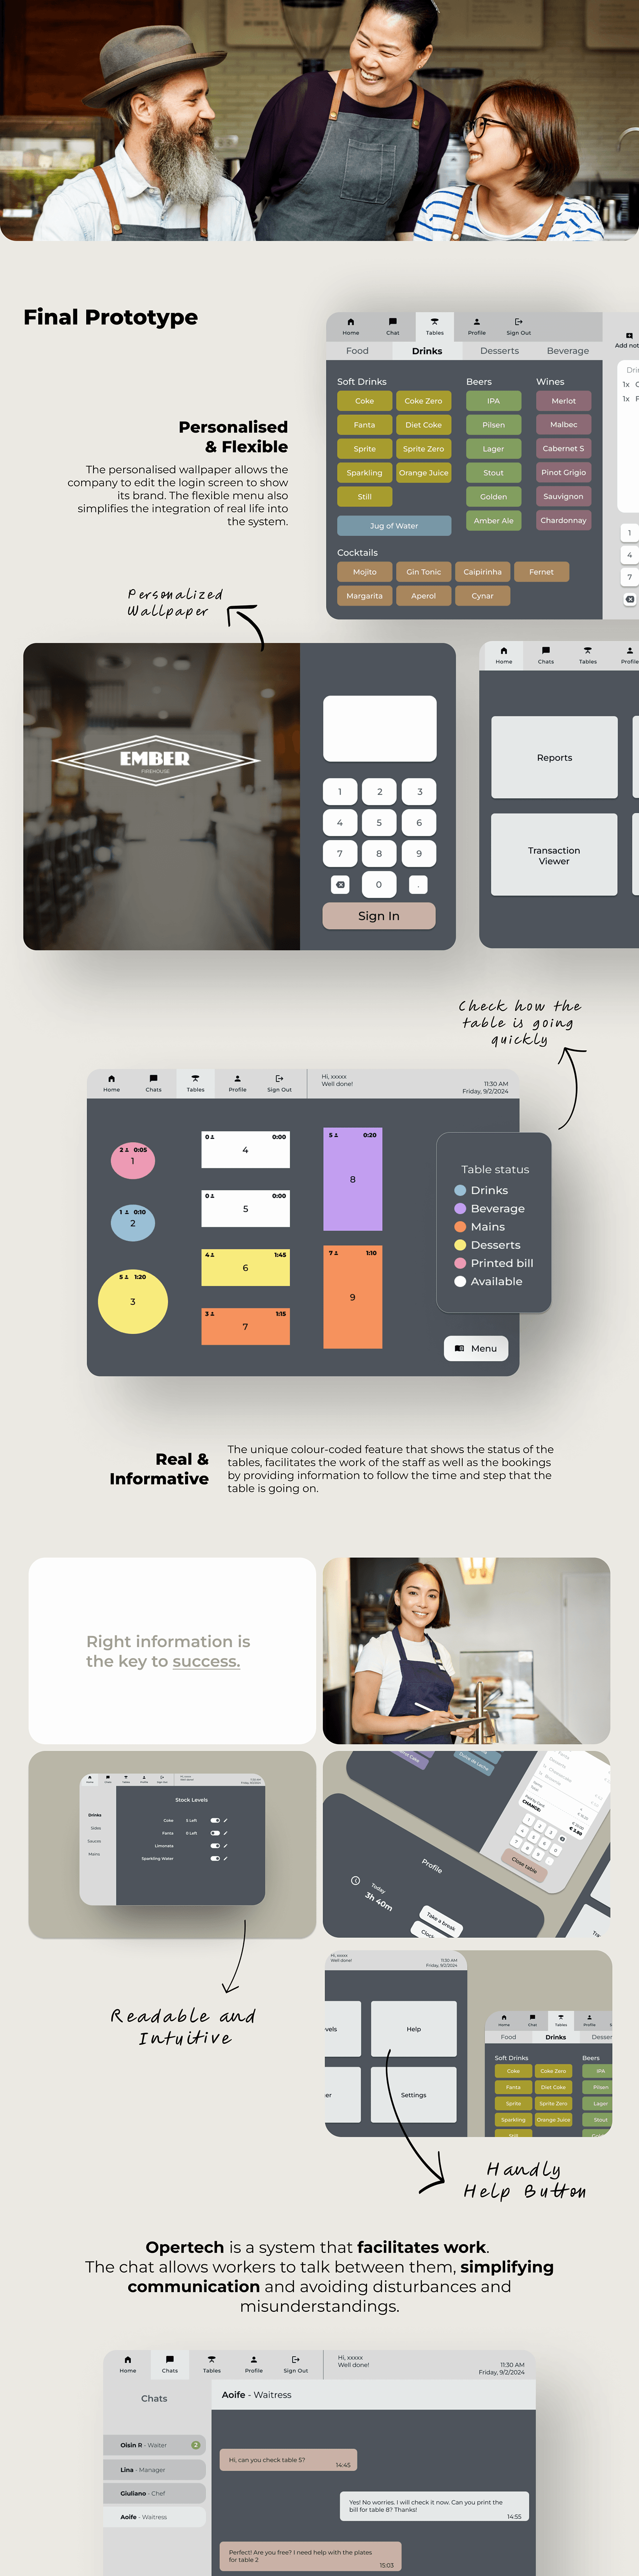 Hospitality UX design Retail ui design UX Research